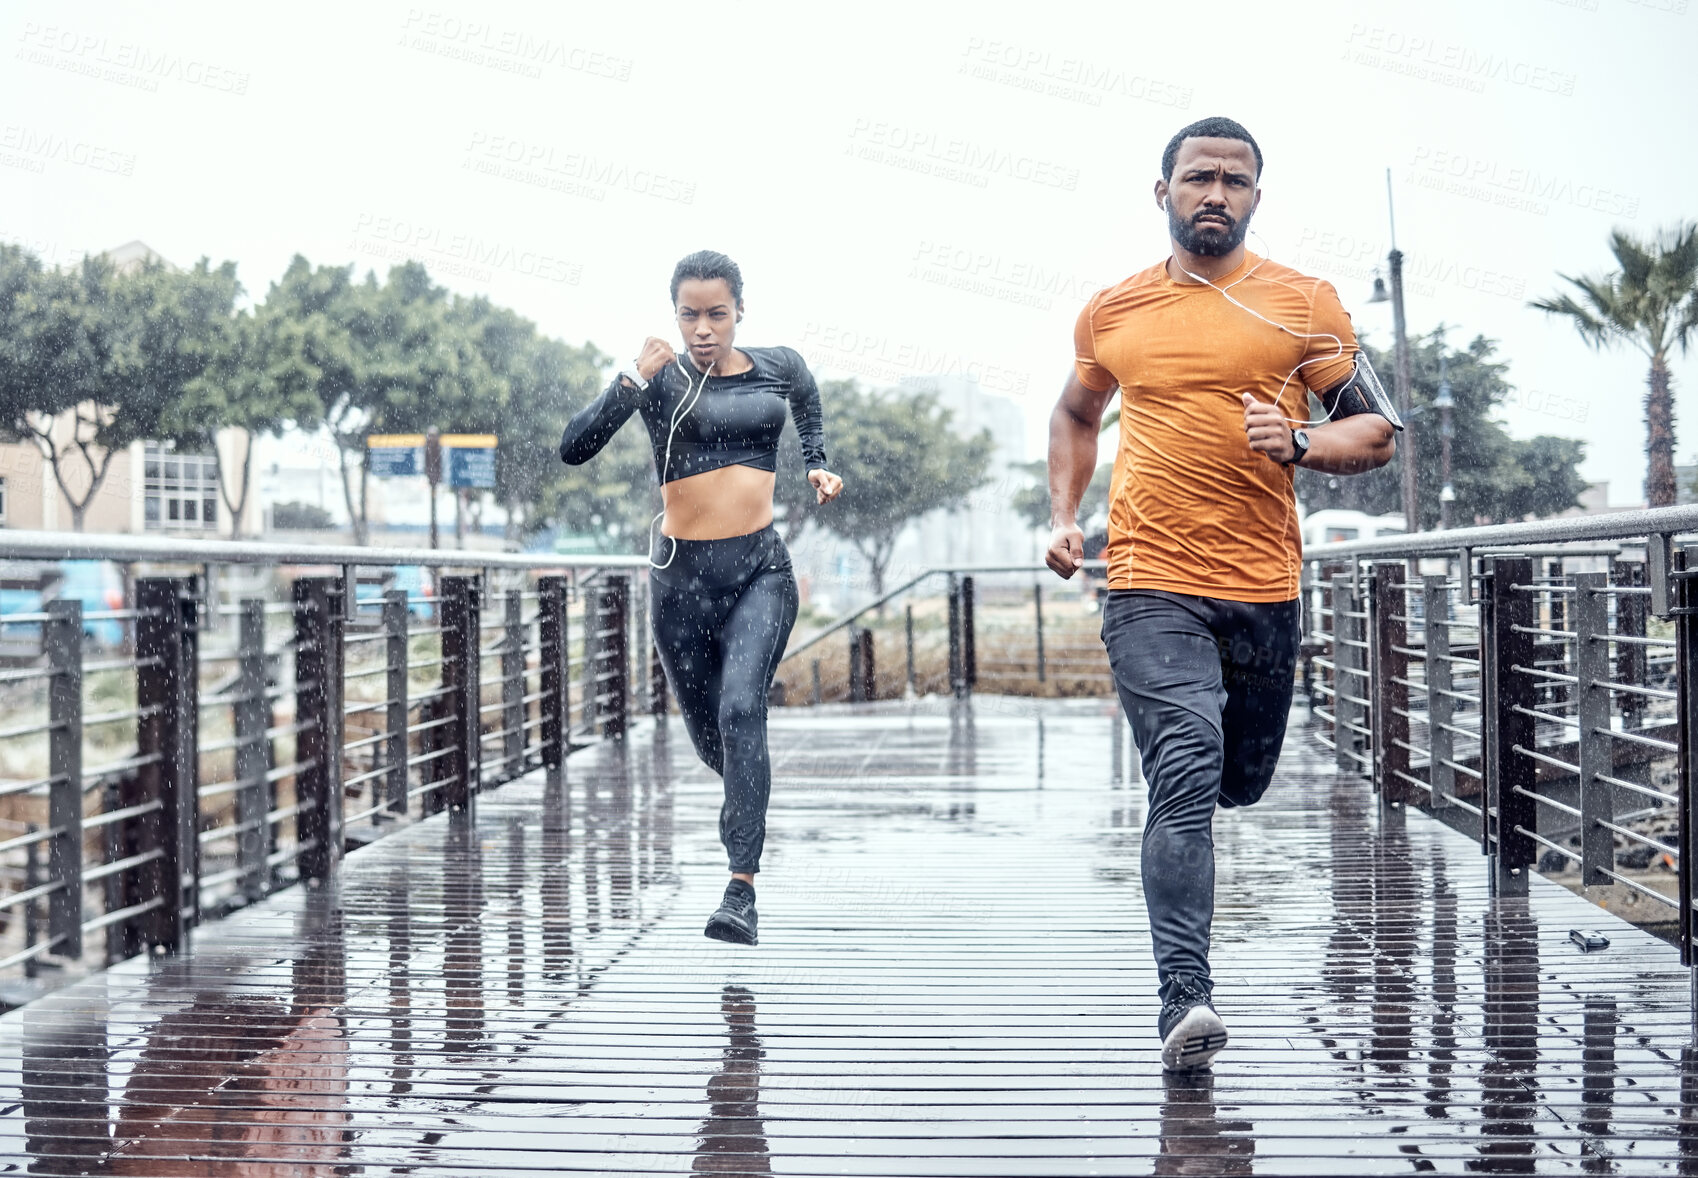 Buy stock photo Personal trainer, rain and athletes running as exercise on a city bridge training, fitness or workout outdoors in town. People or fit friends sprint fast for wellness, cardio and health lifestyle